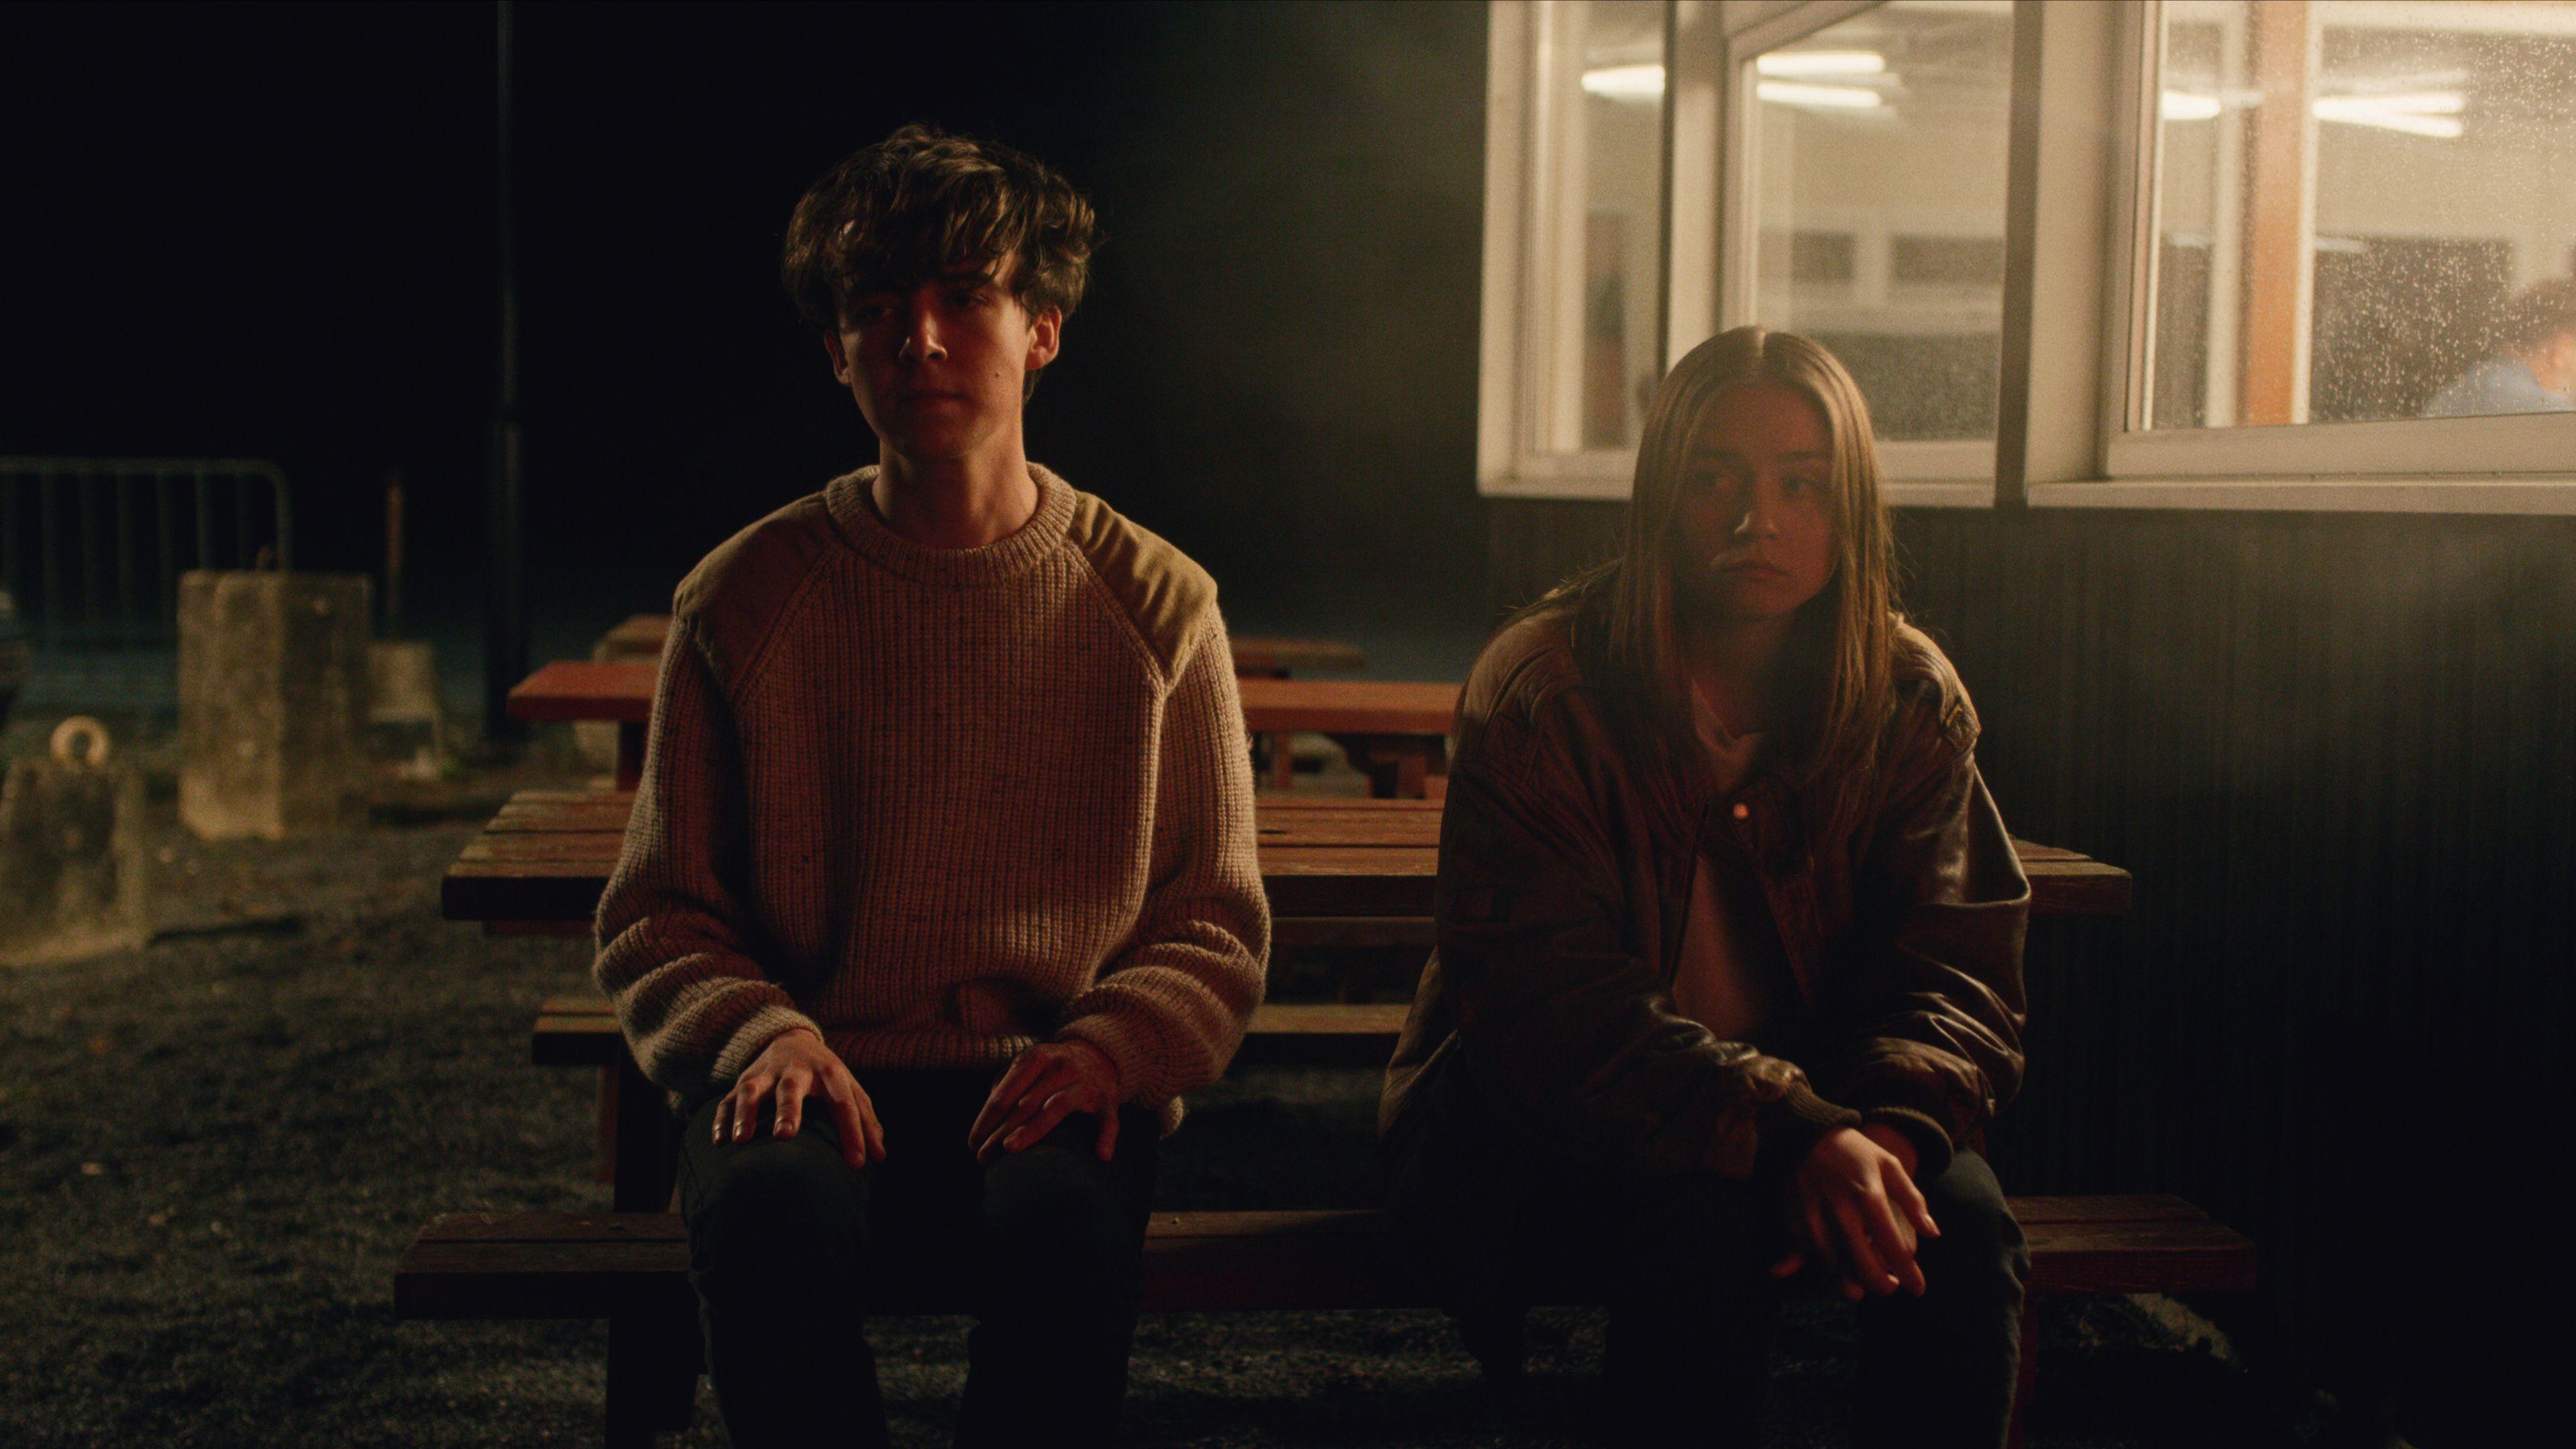 Interview: Alex Lawther & Jessica Barden talk 'The End